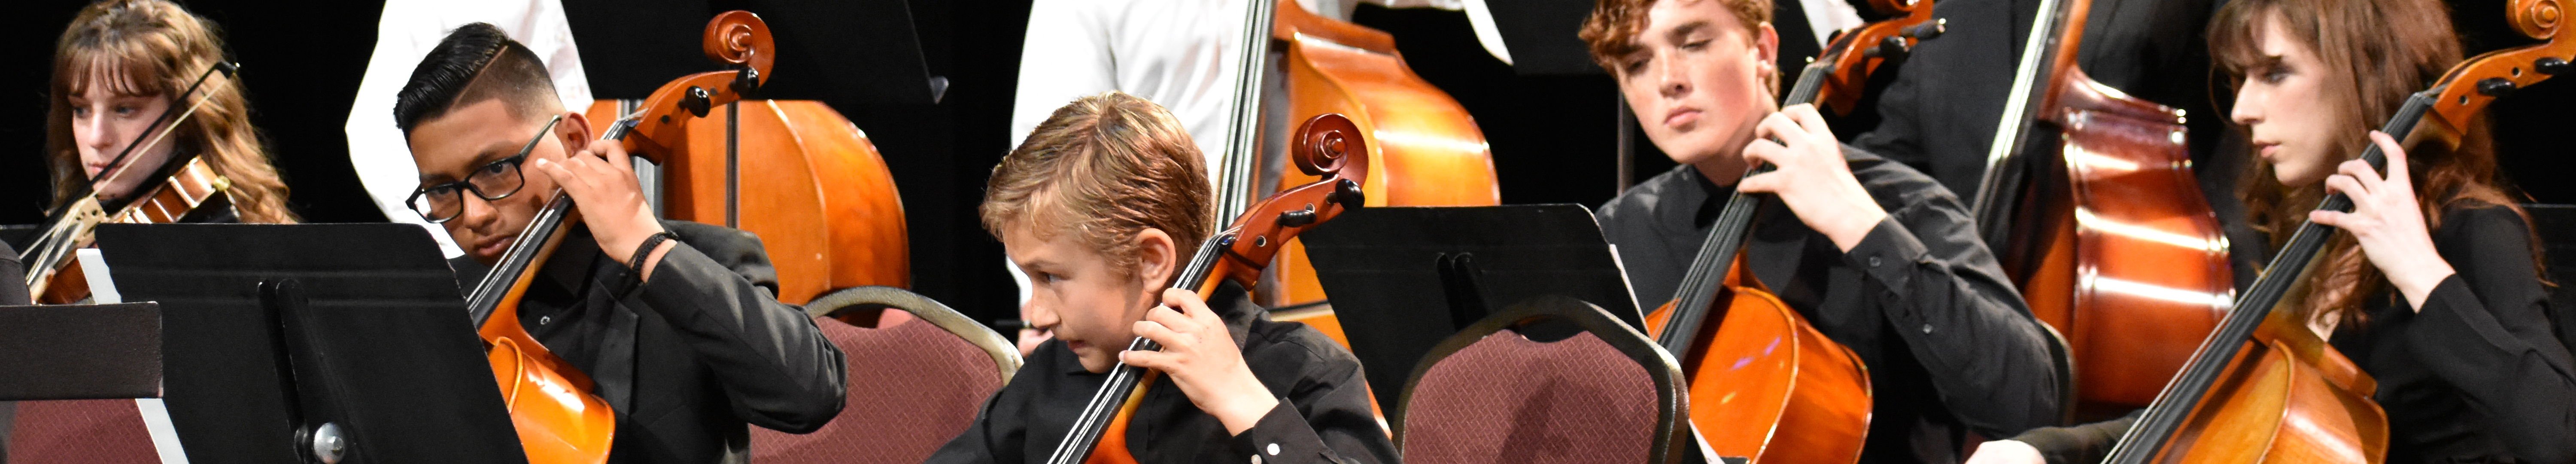 East County Youth Symphony - Advanced Orchestra